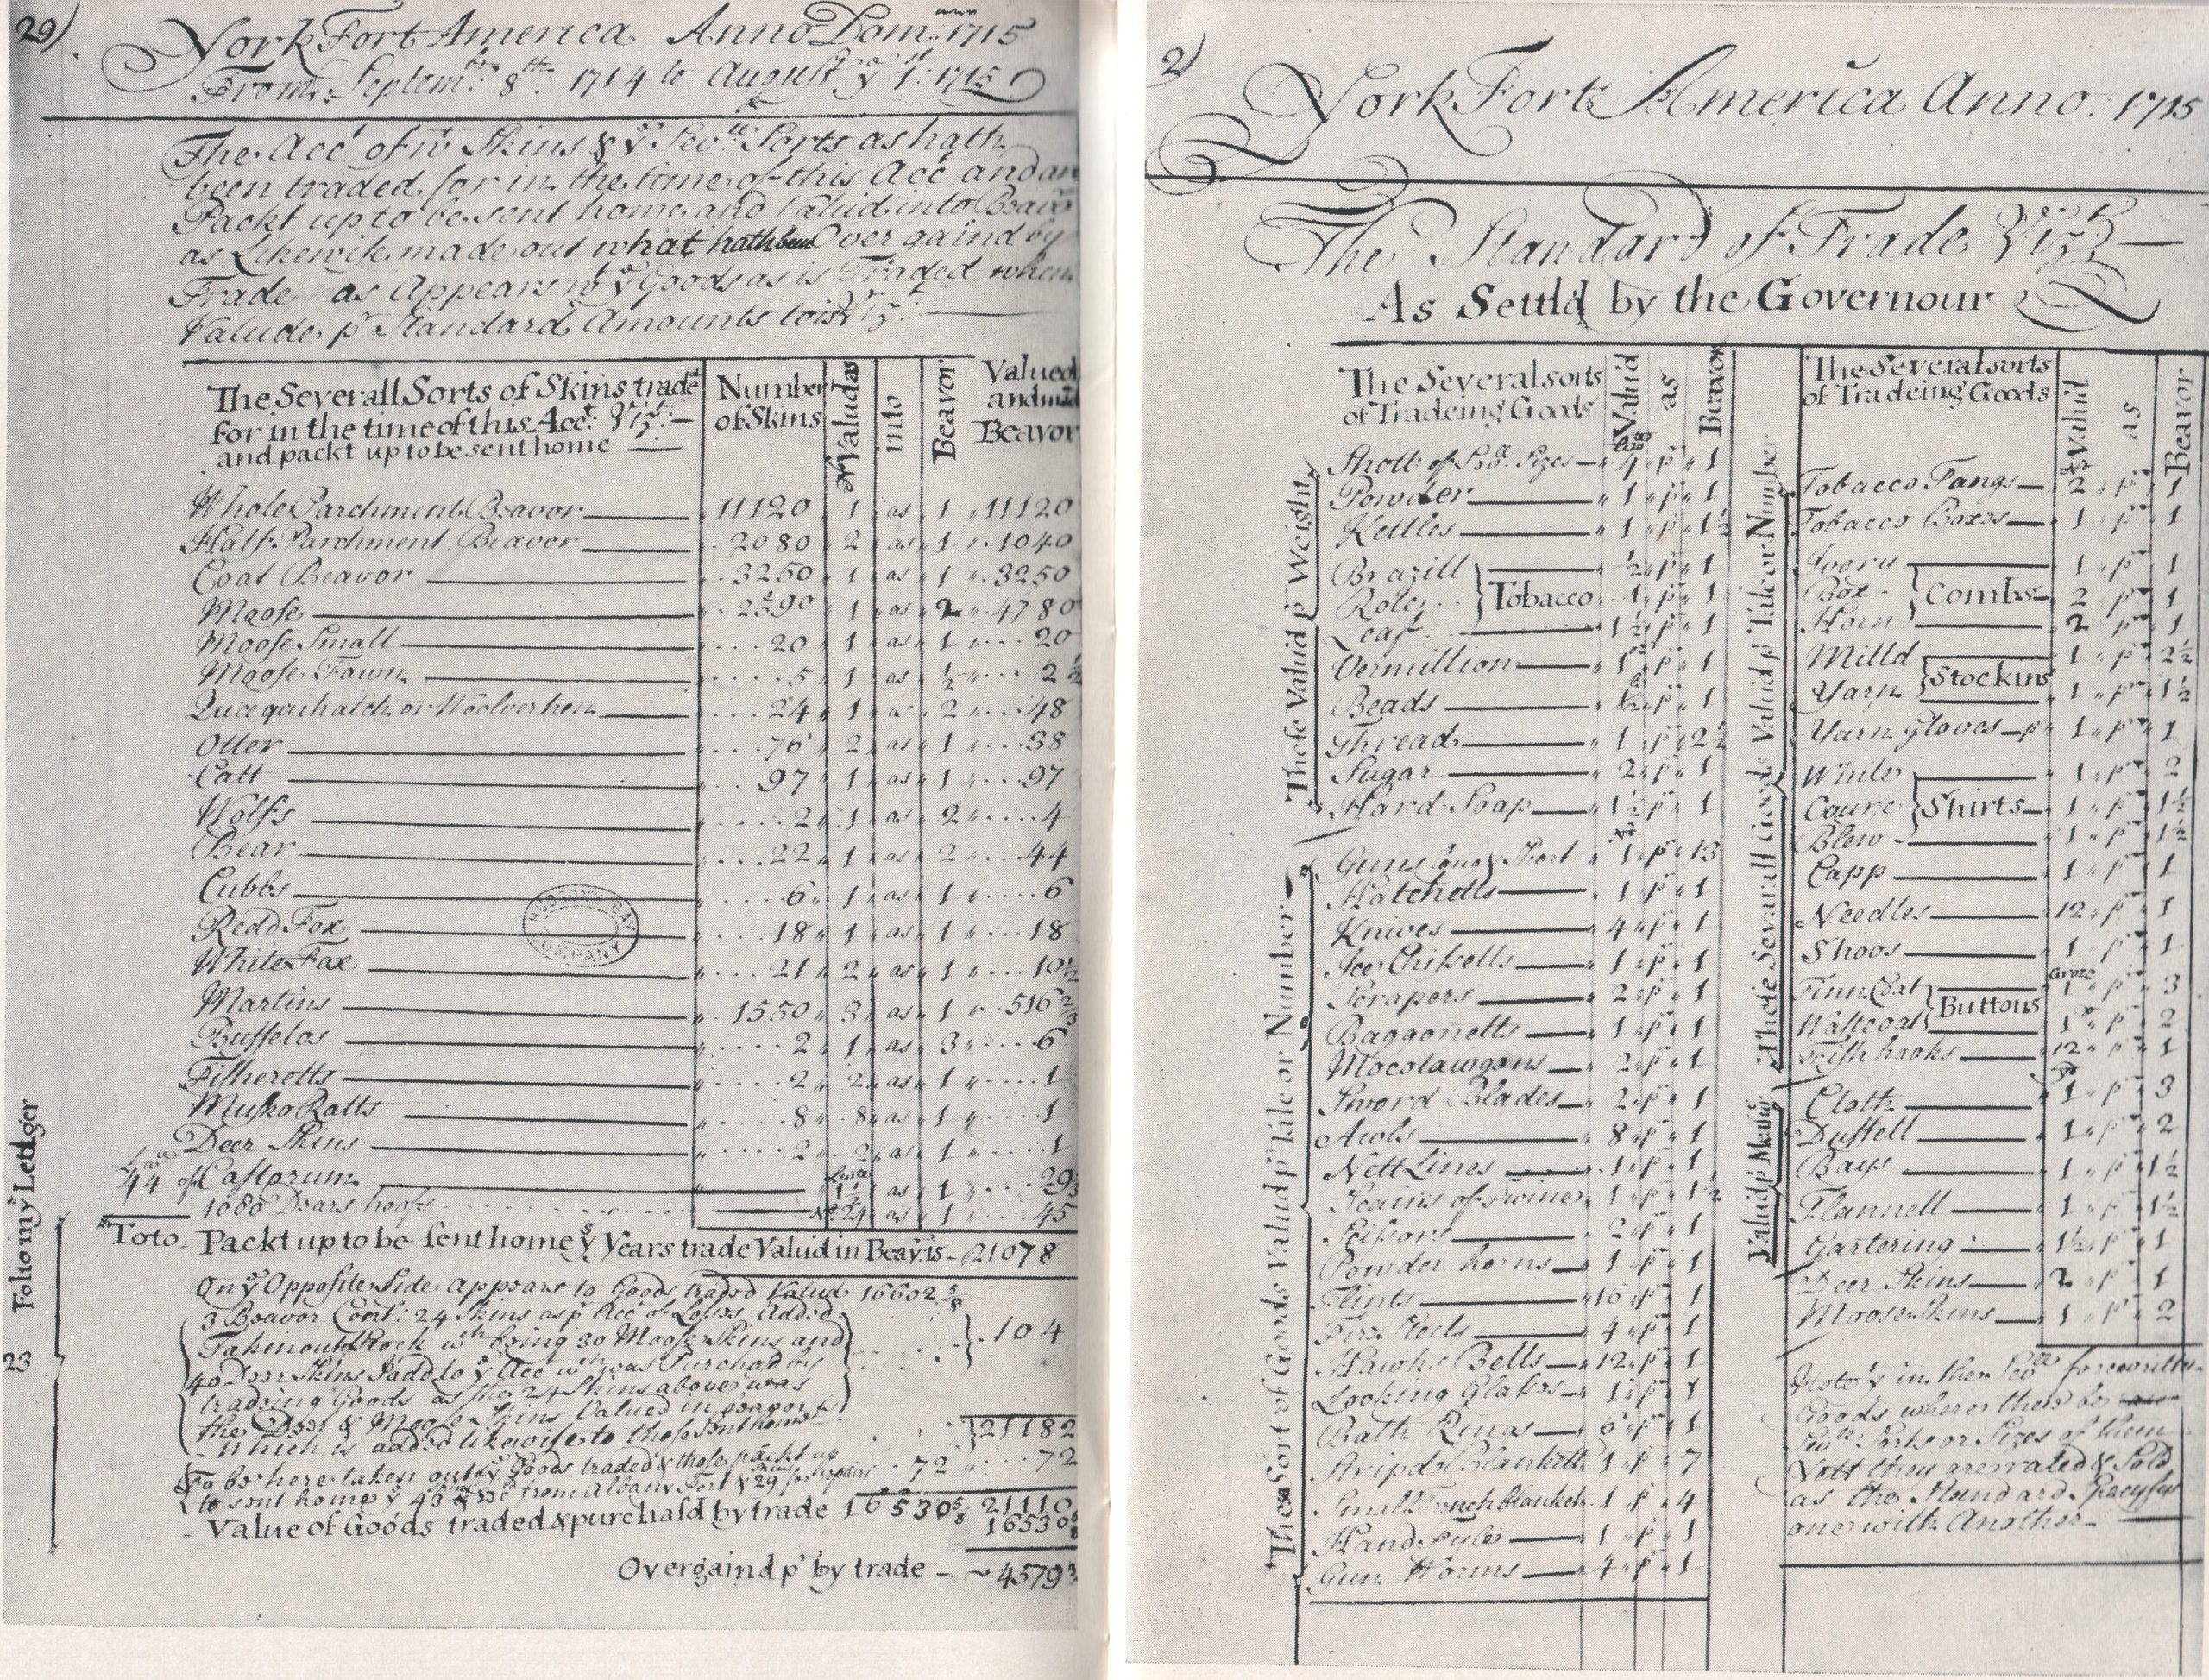 A ledger showing the type, number, and value of different types of furs traded at York. Long description available.